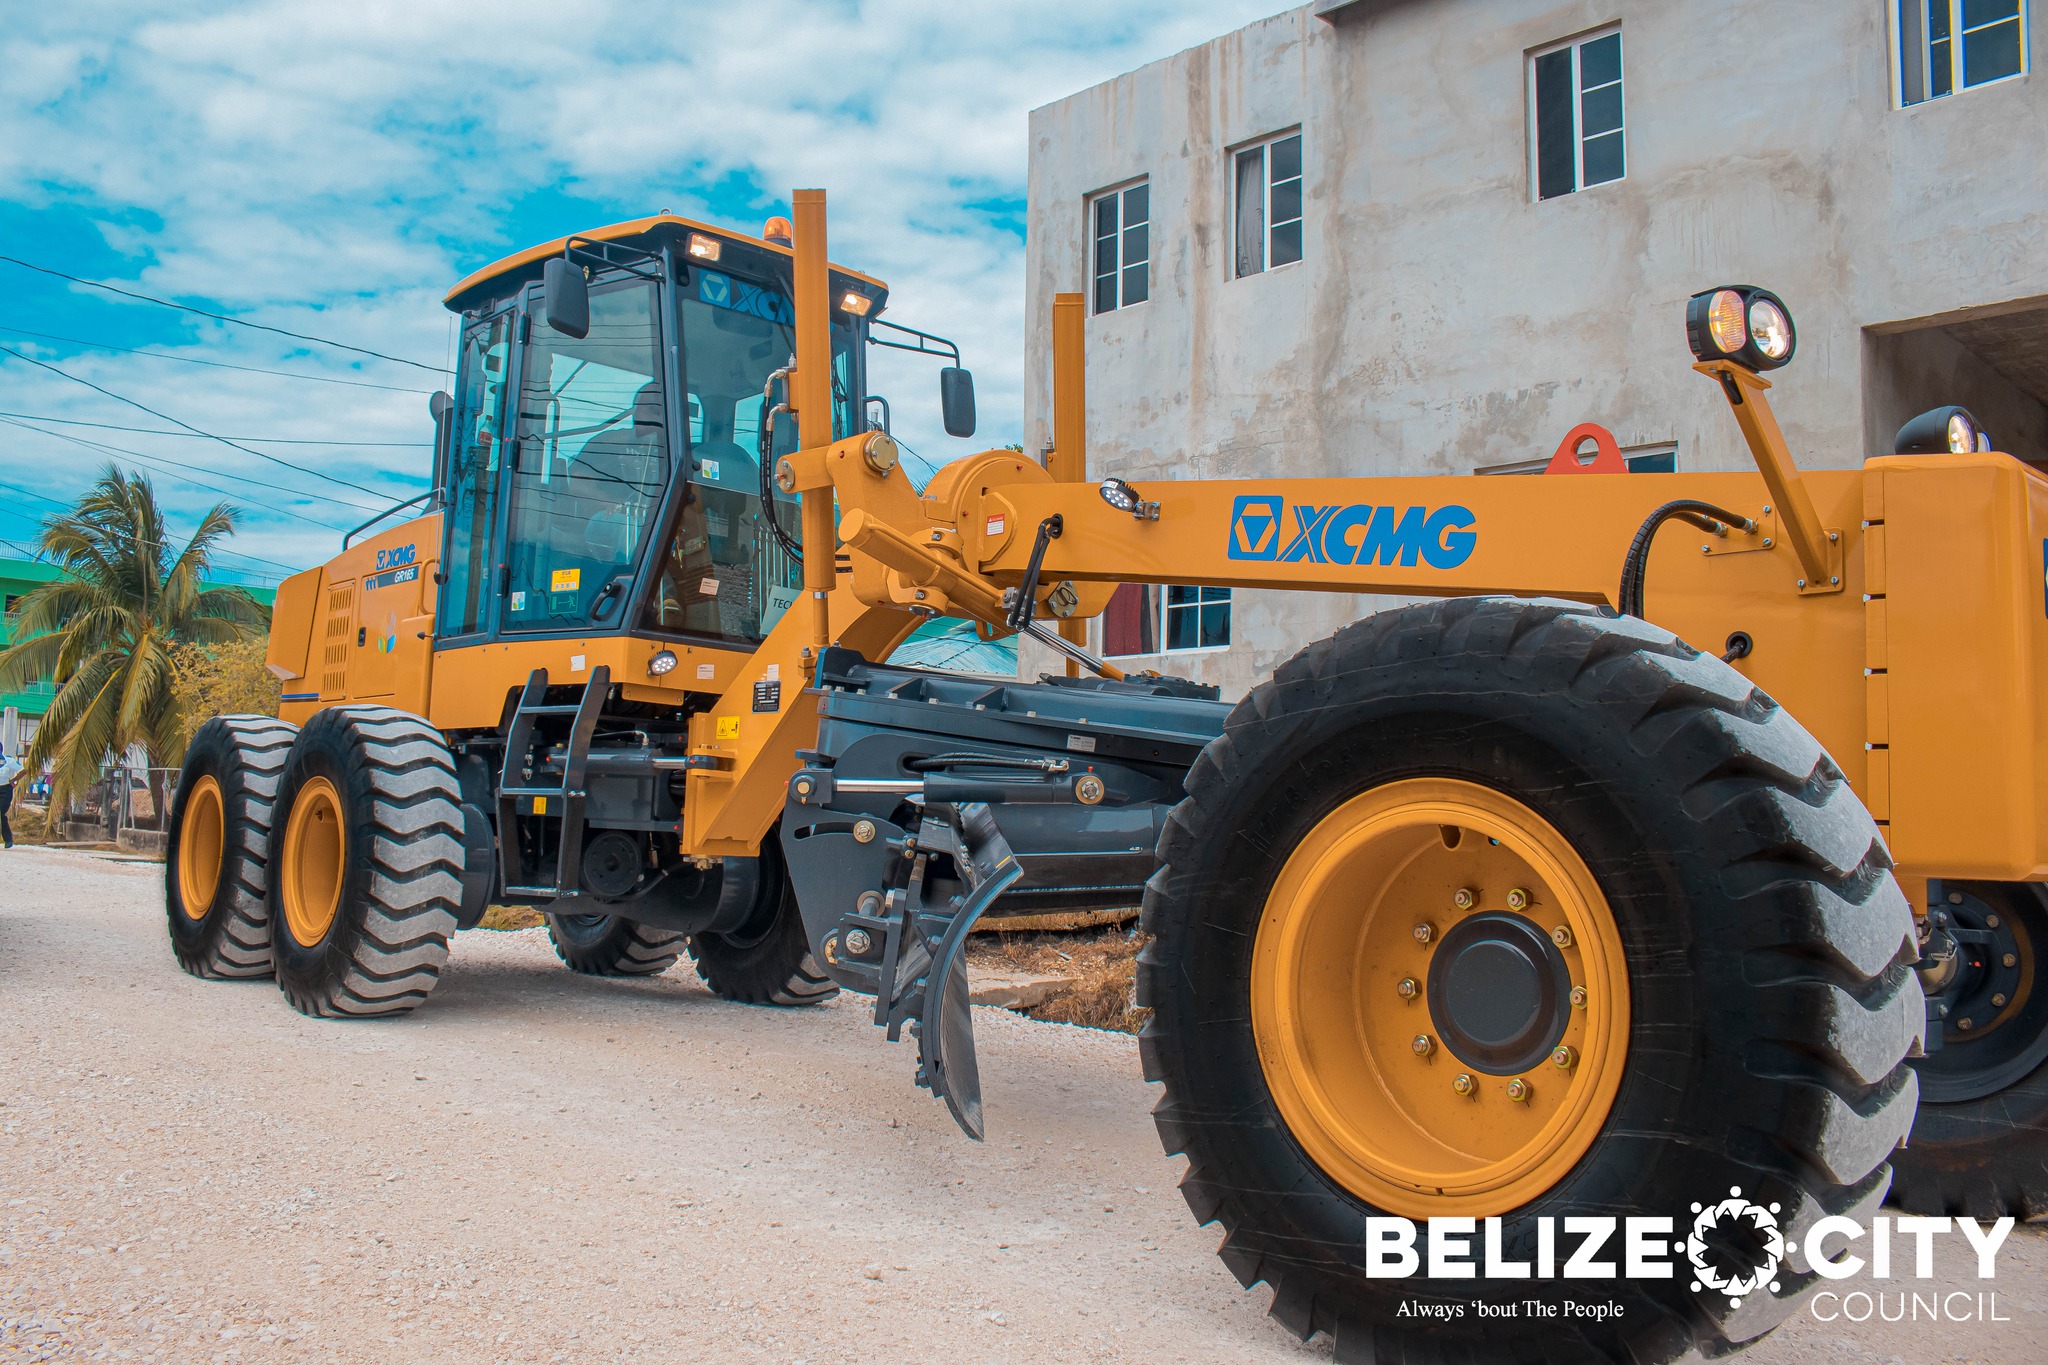 Belize City Council has purchased a new GR165 Motor Grader